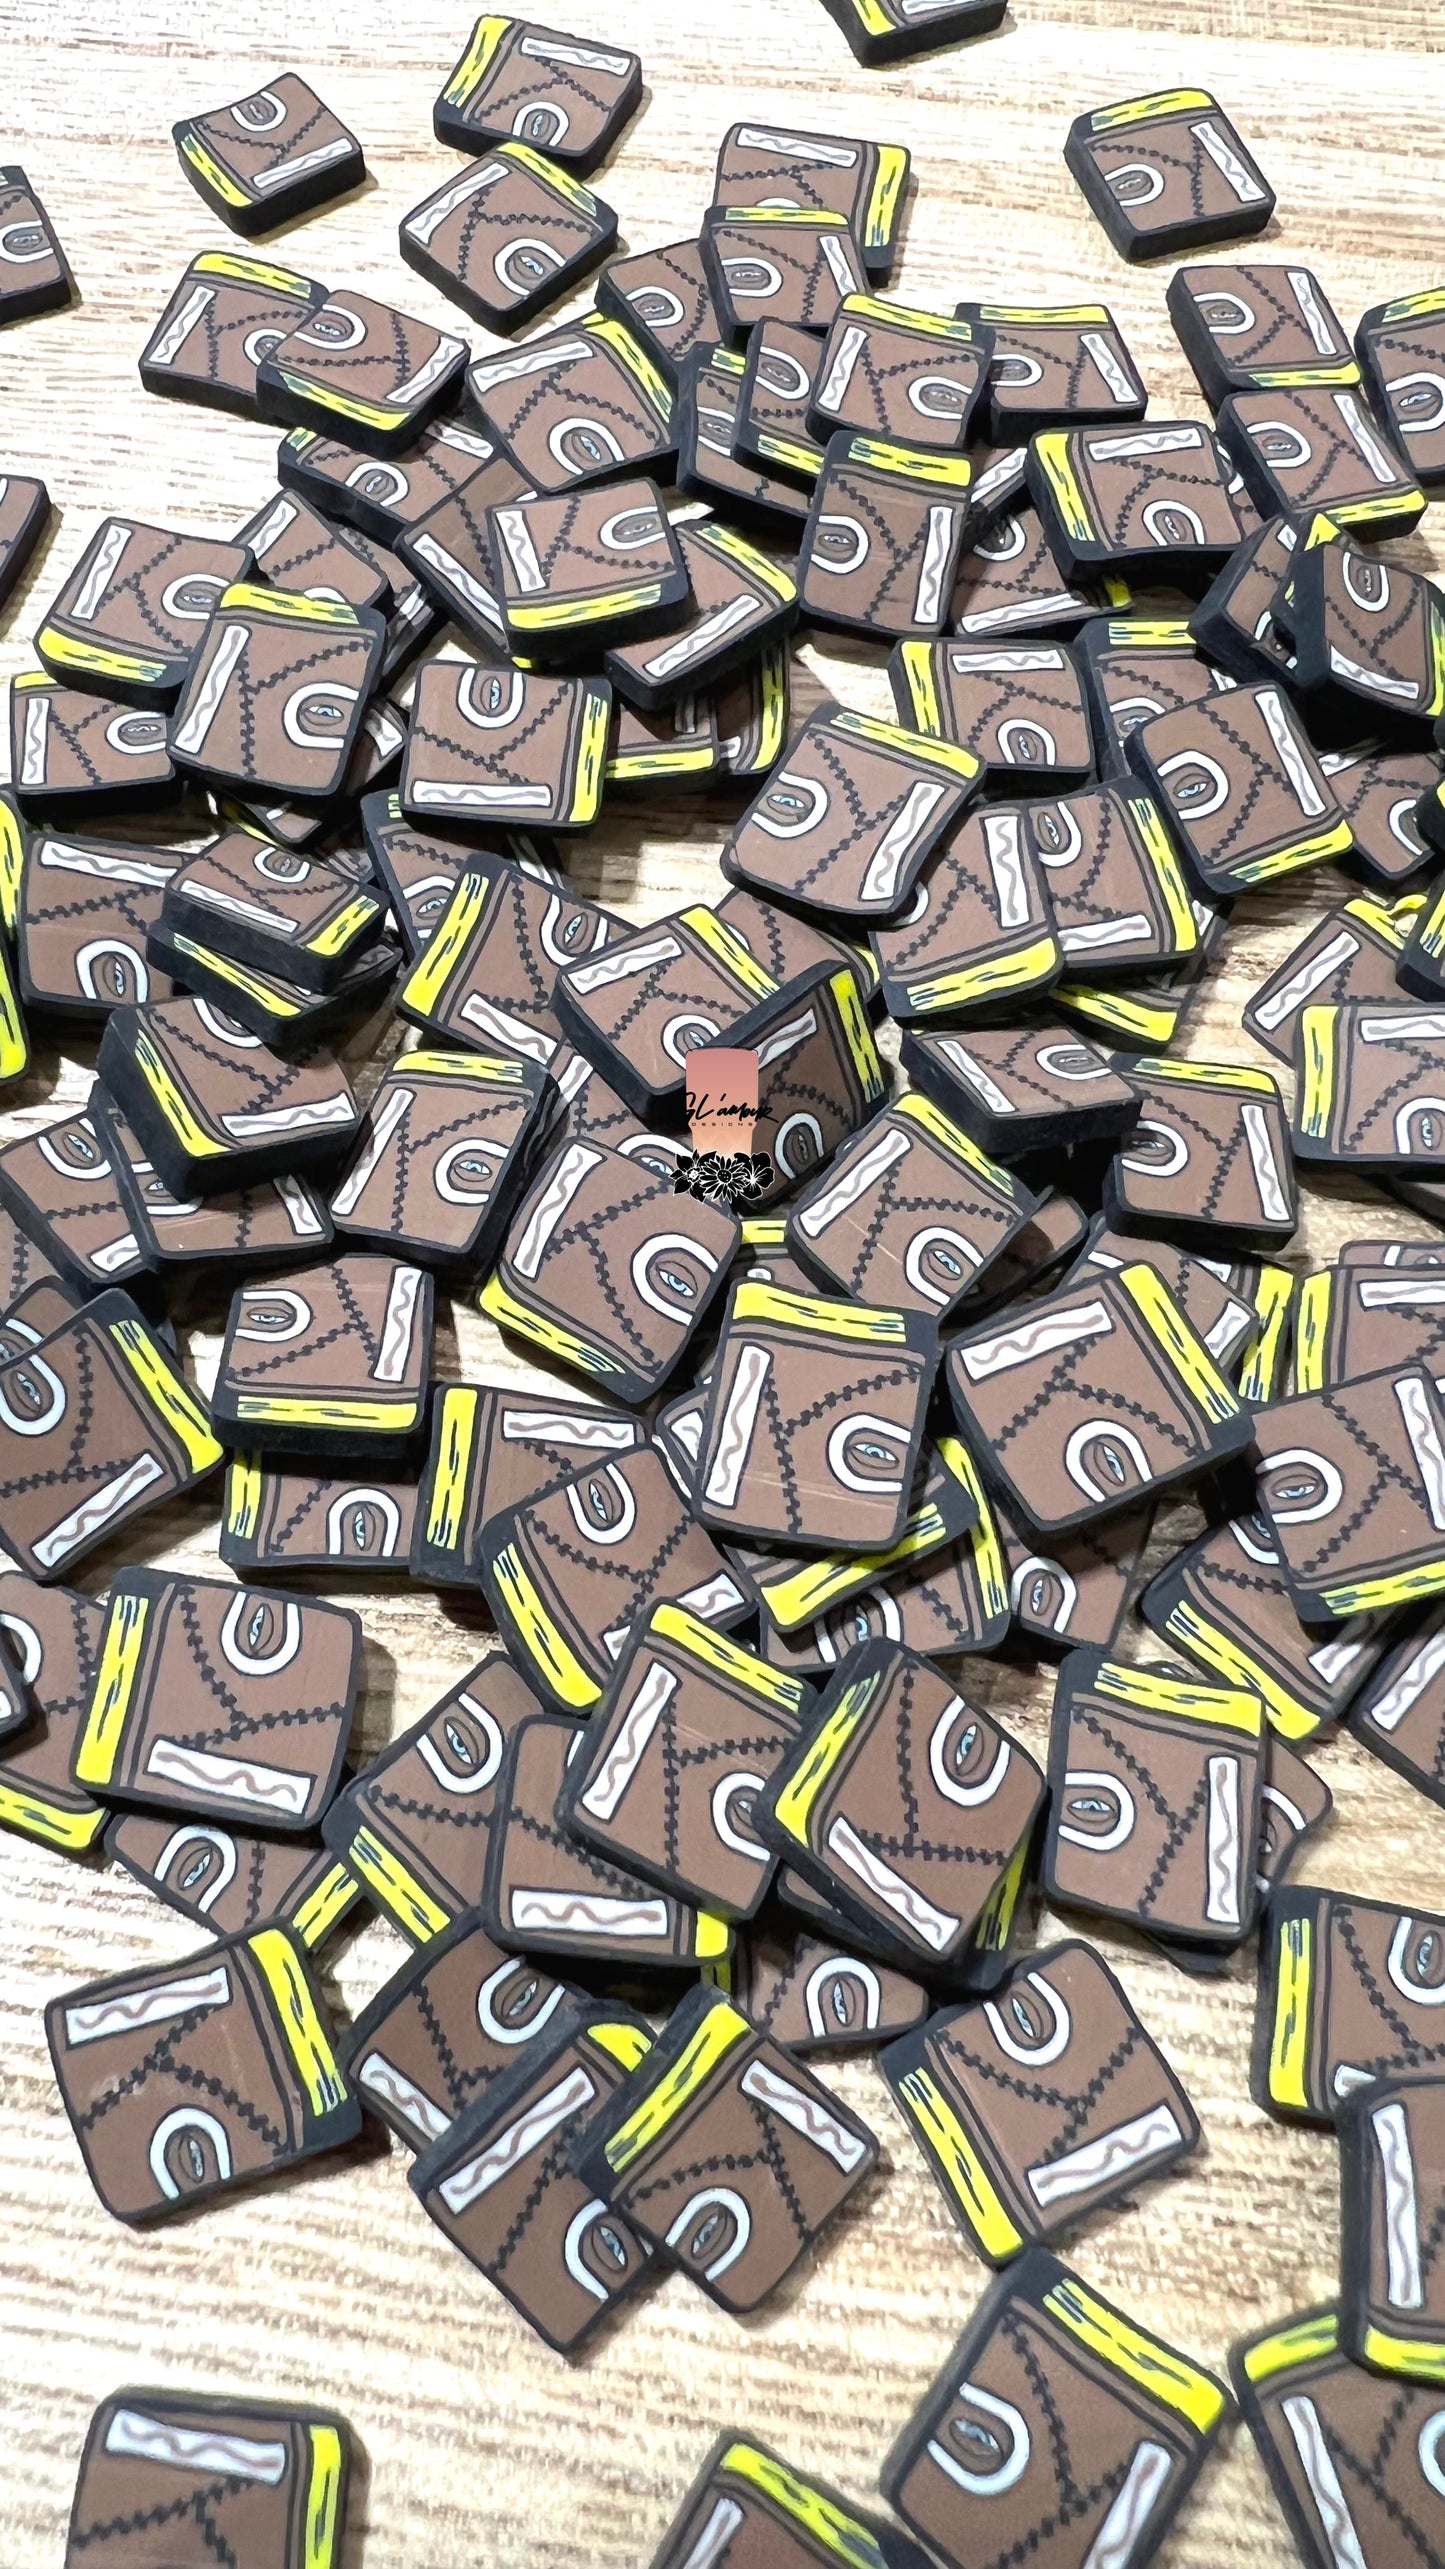 Pocus Spell Book Polymer Slices - 10mm Large